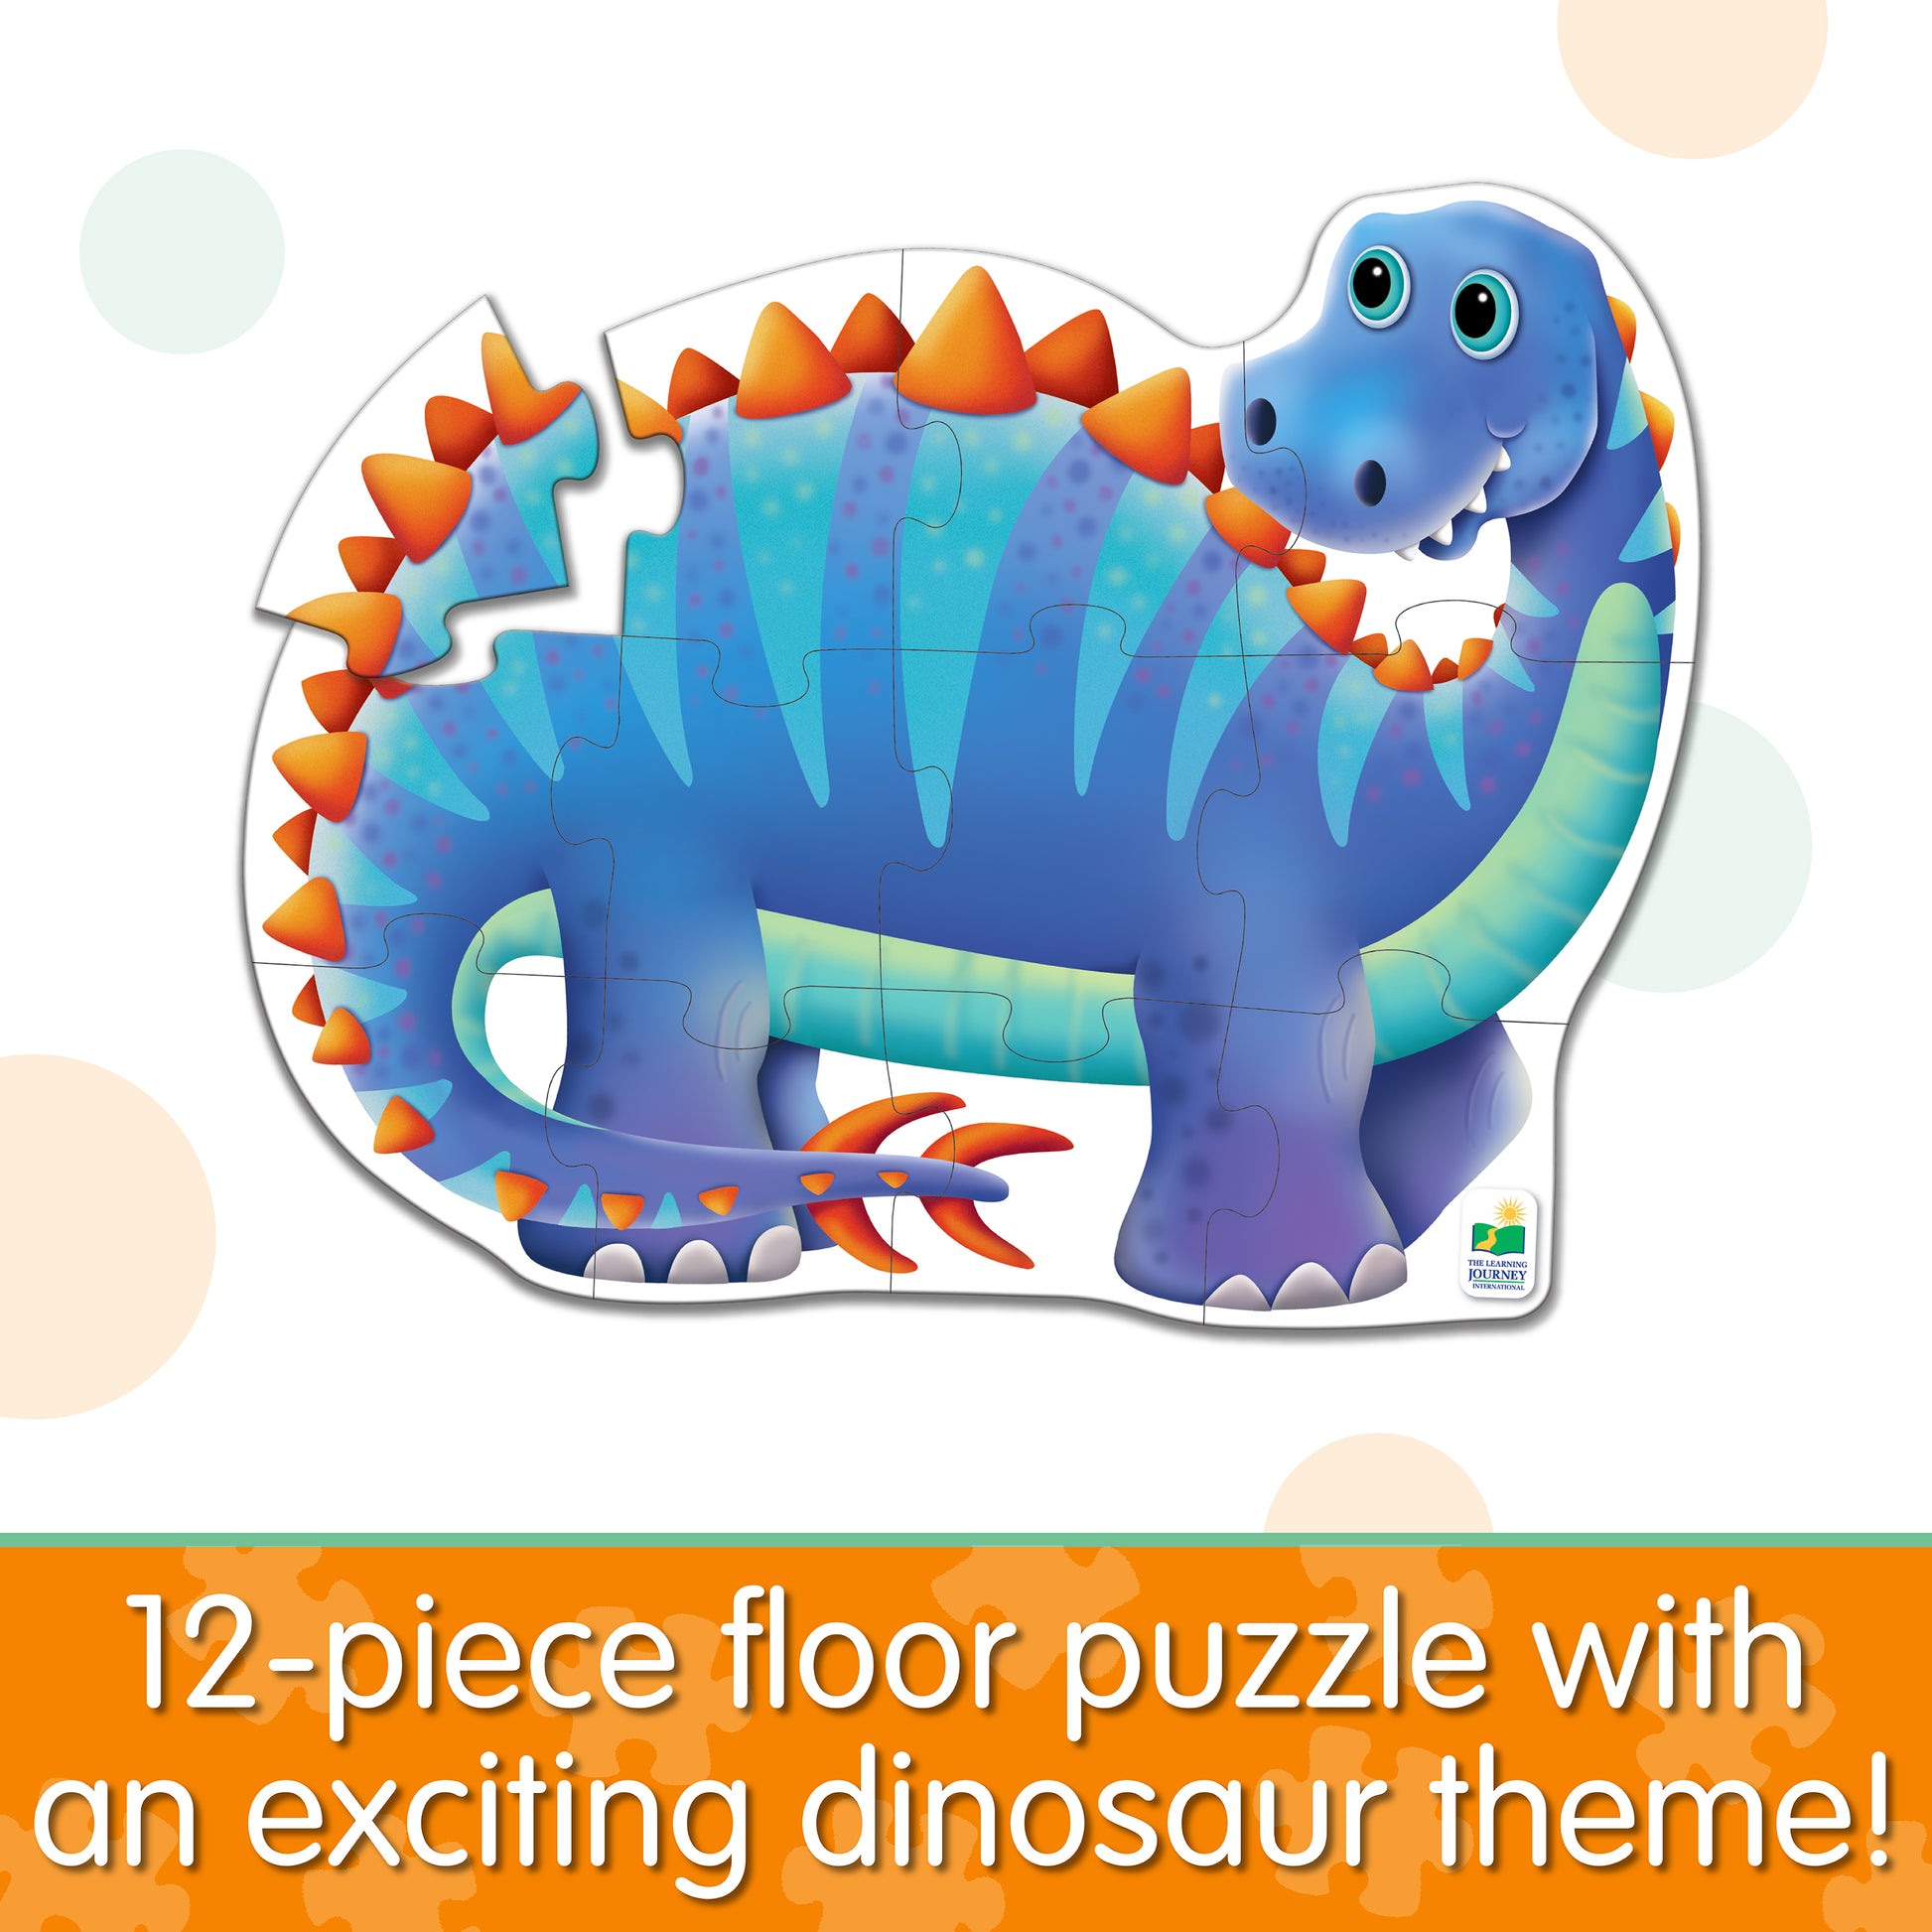 Infographic about My First Big Puzzle - Dinosaur that says, "12-piece floor puzzle with an exciting dinosaur theme!"